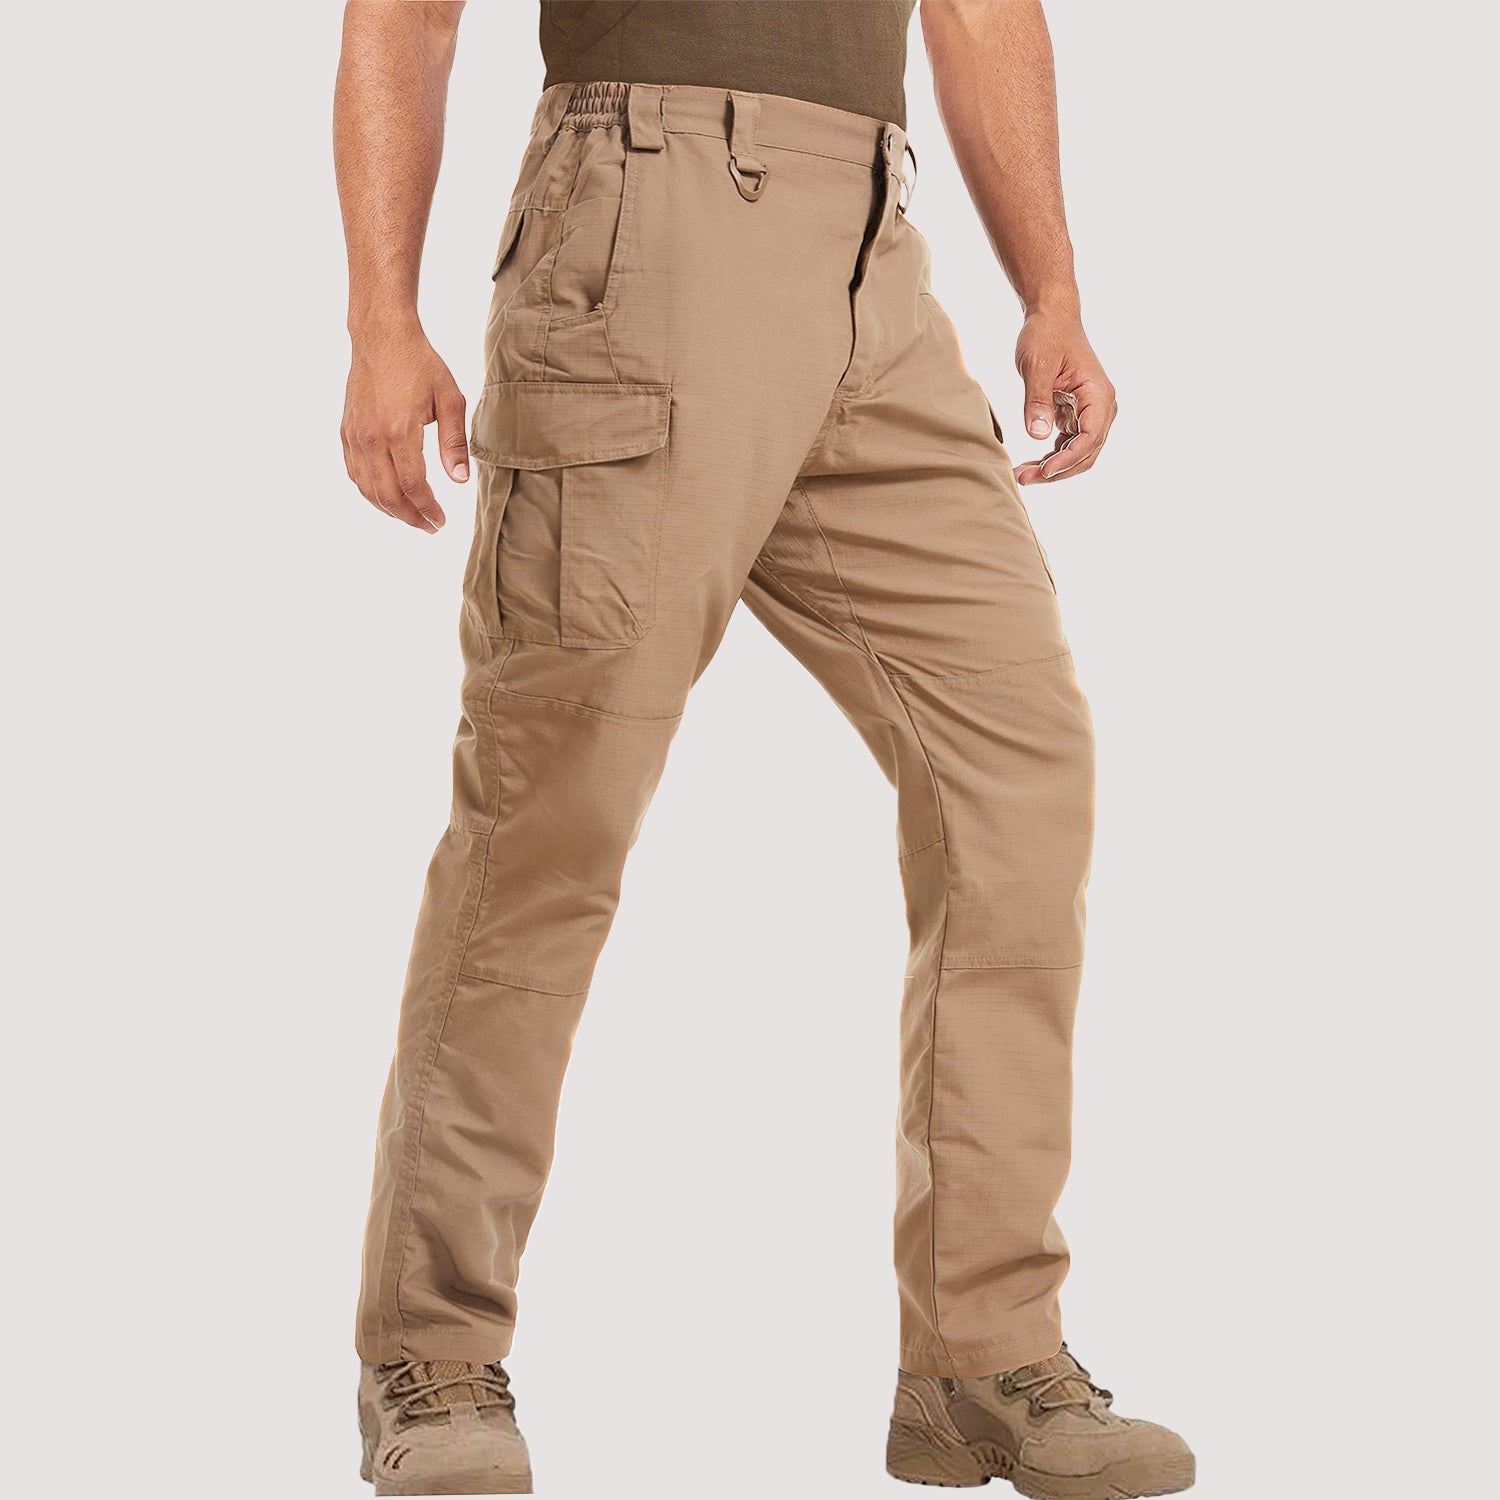 Men's Tactical 9 Pockets Ripstop, Water Repellent, Cargo Pants for Work, Hiking, Hunting pants